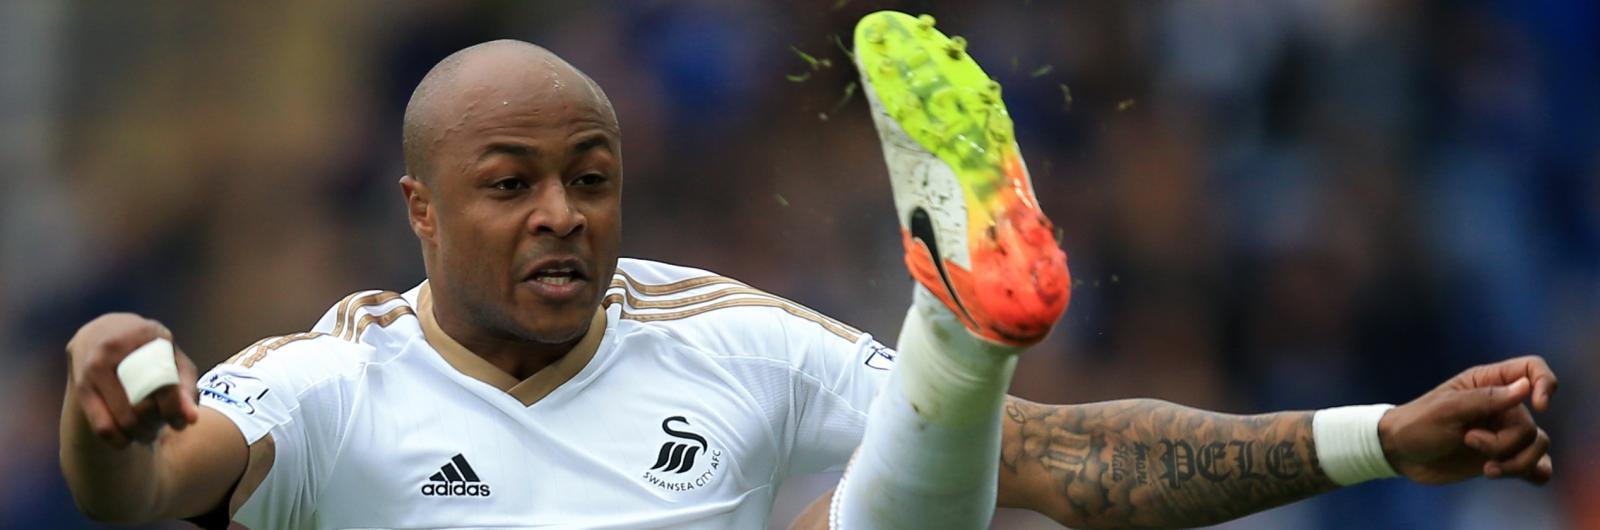 West Ham United seal club-record £20.5m deal for Andre Ayew